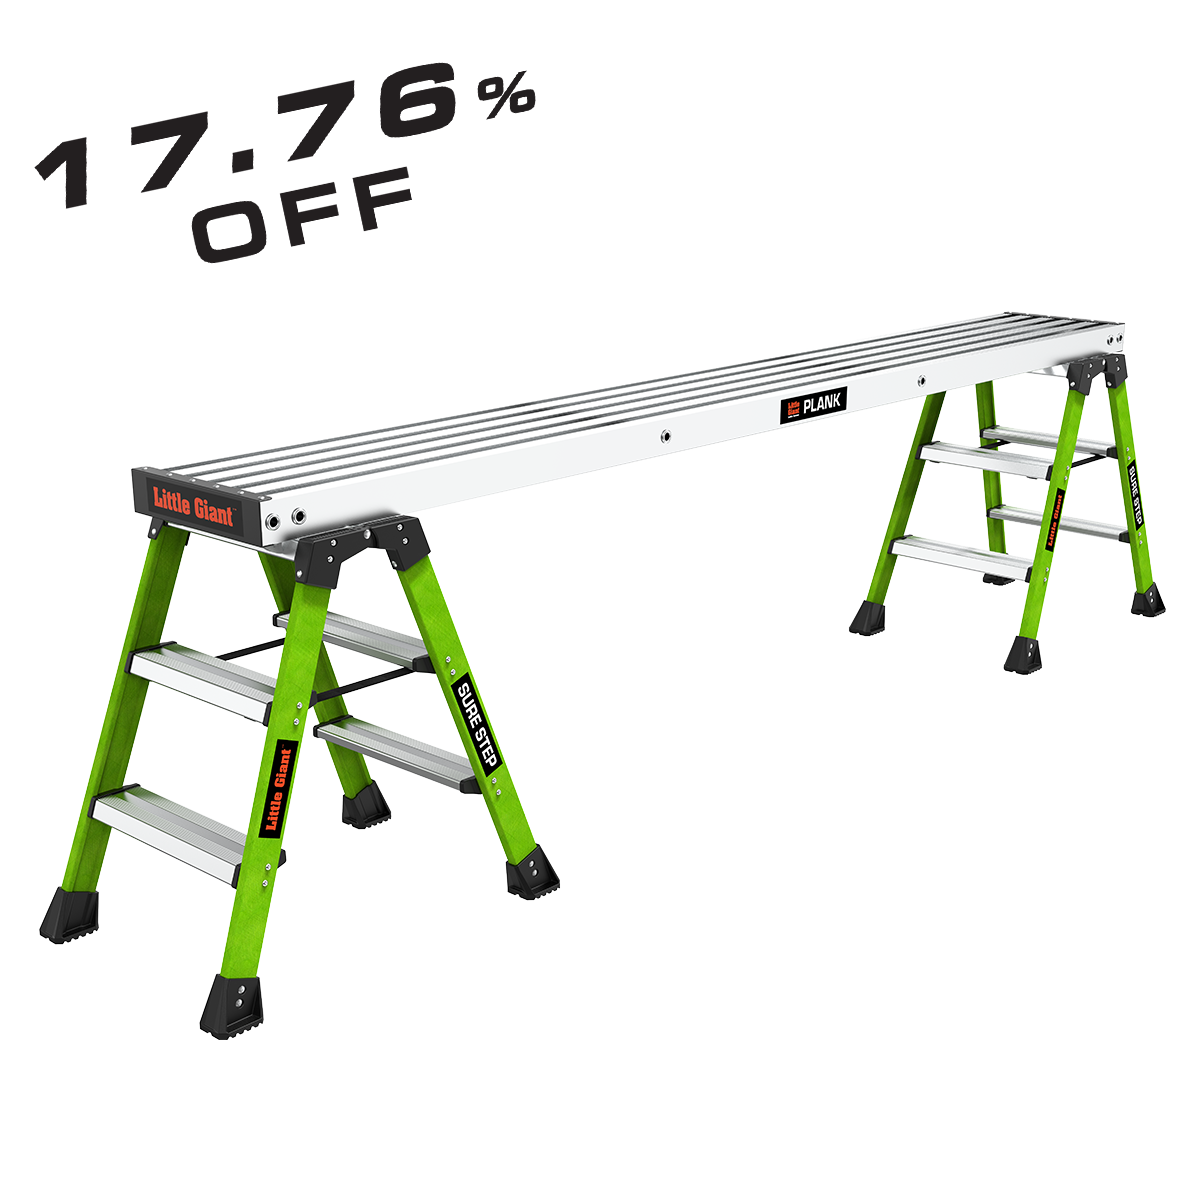 17.76 % off 2 sure step step ladders and 8 foot standard plank